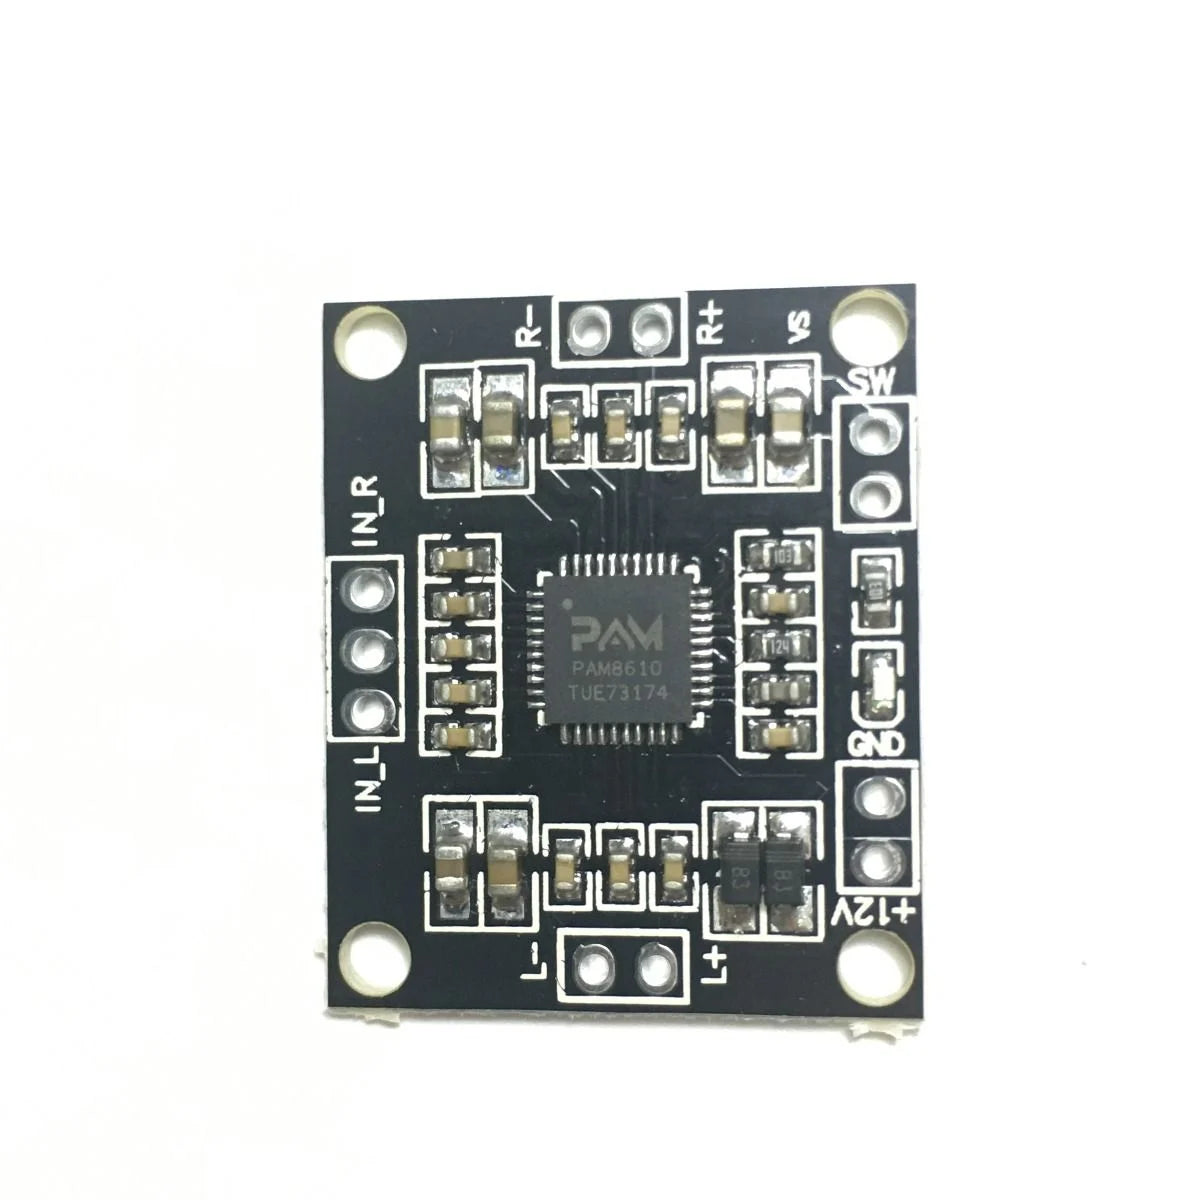 PAM 8610 Digital Stereo Class-D Amplifier Board 2x15W Output Rated 4.91